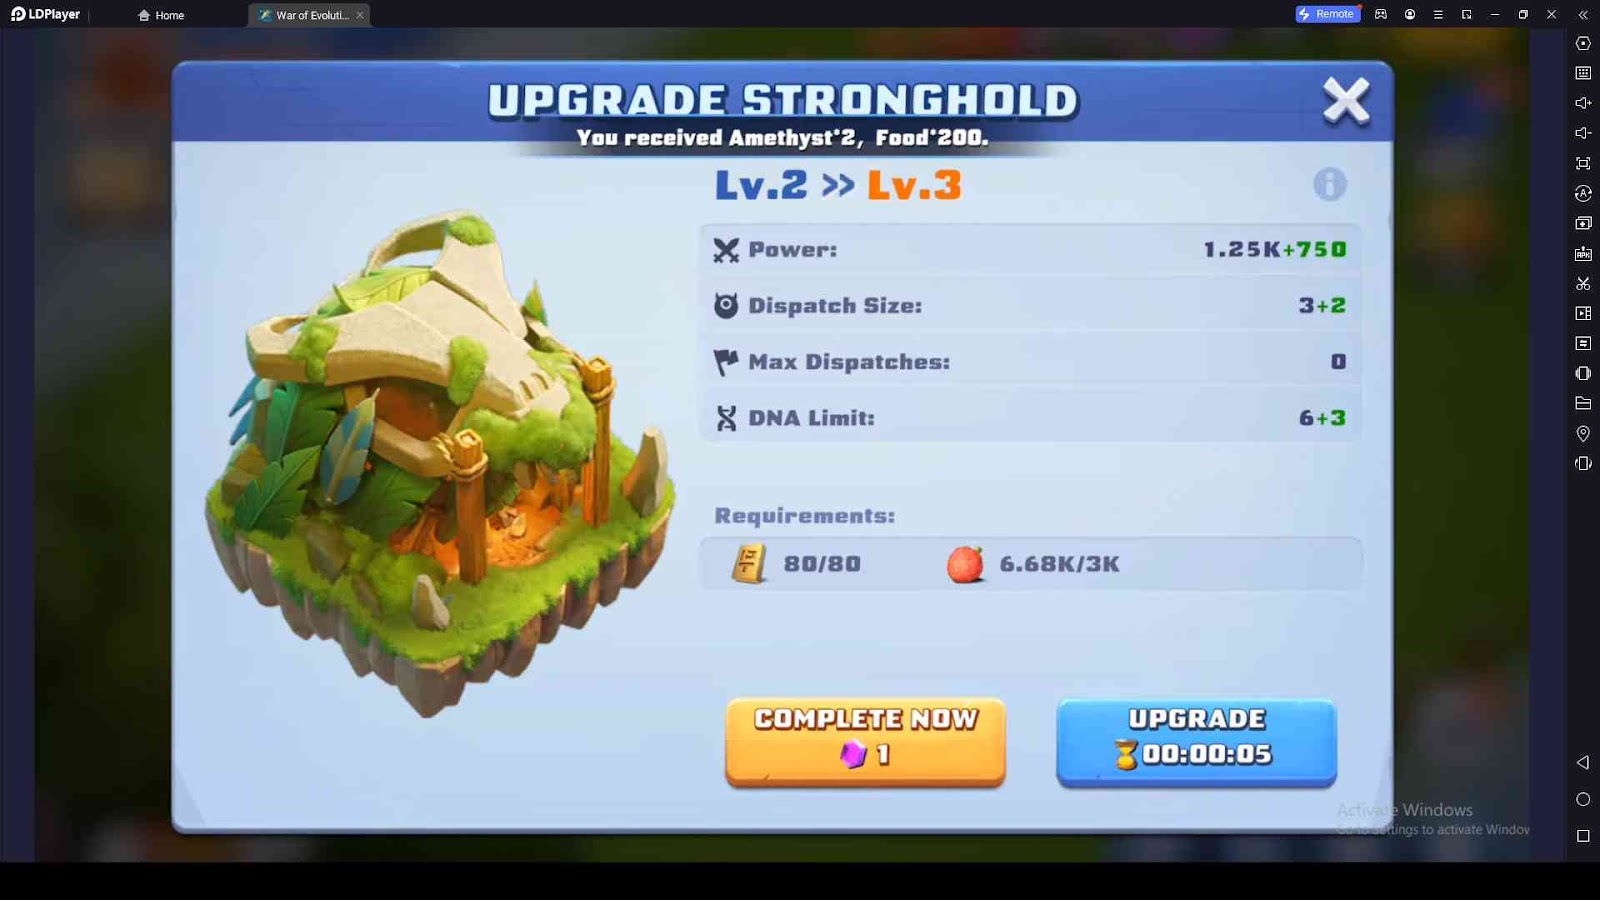 Upgrade the Stronghold